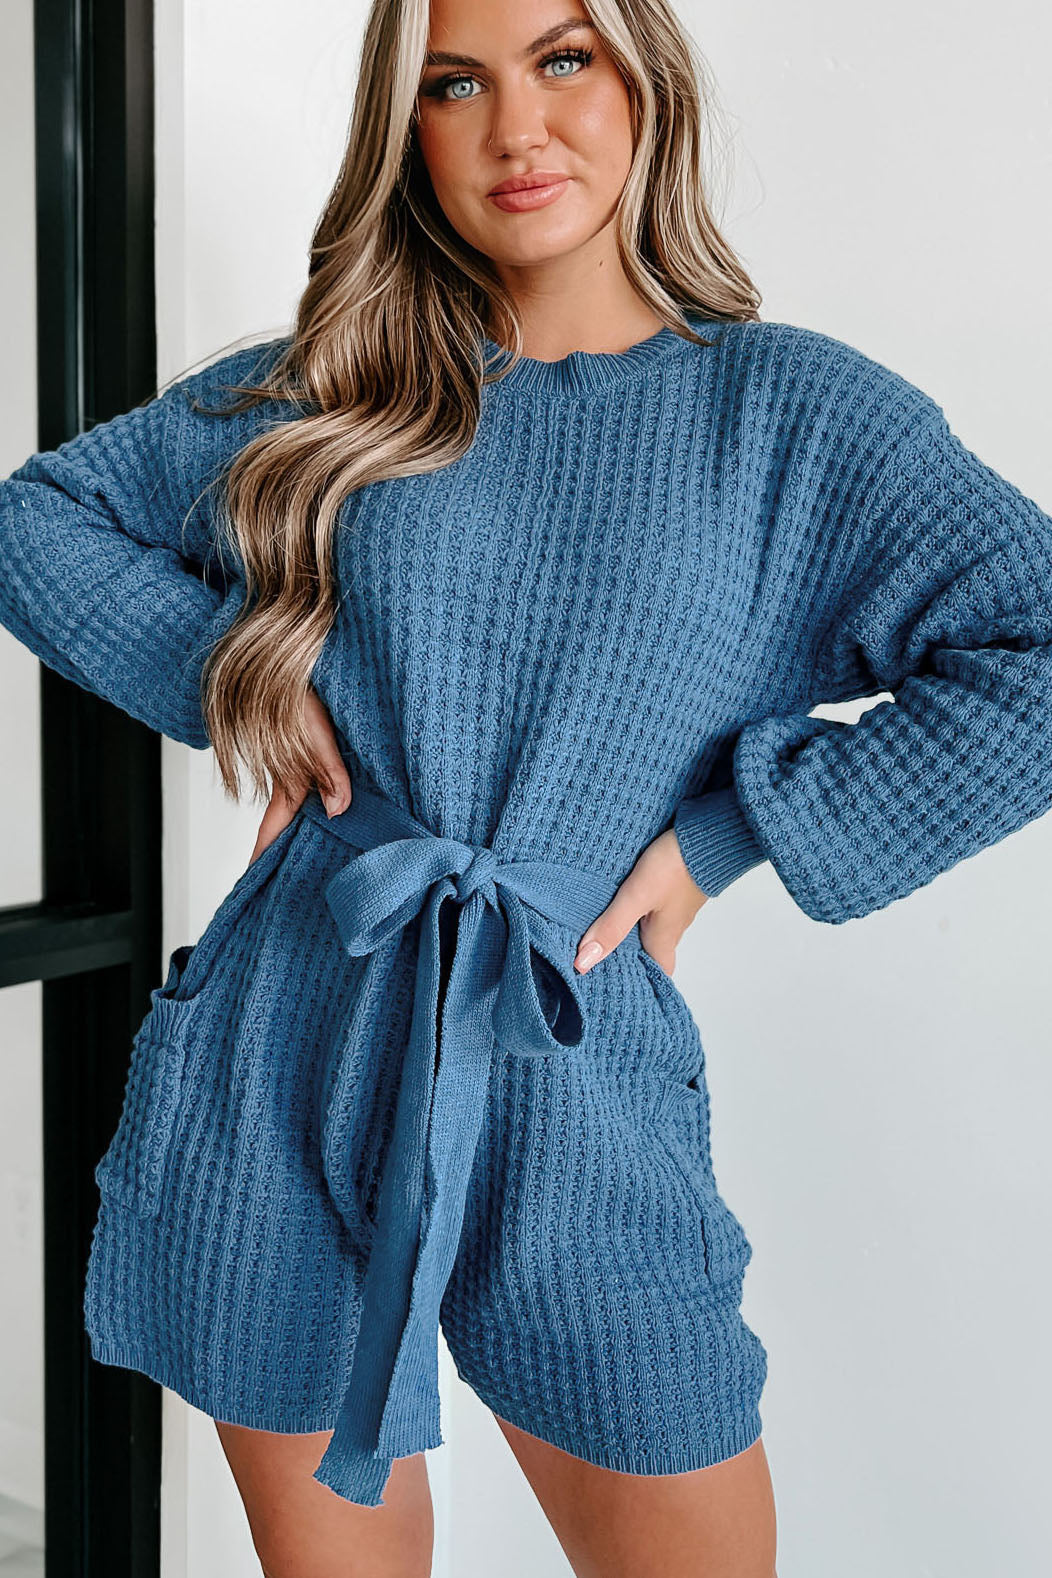 Putting My Troubles Aside Sweater Knit Romper (Navy) - NanaMacs